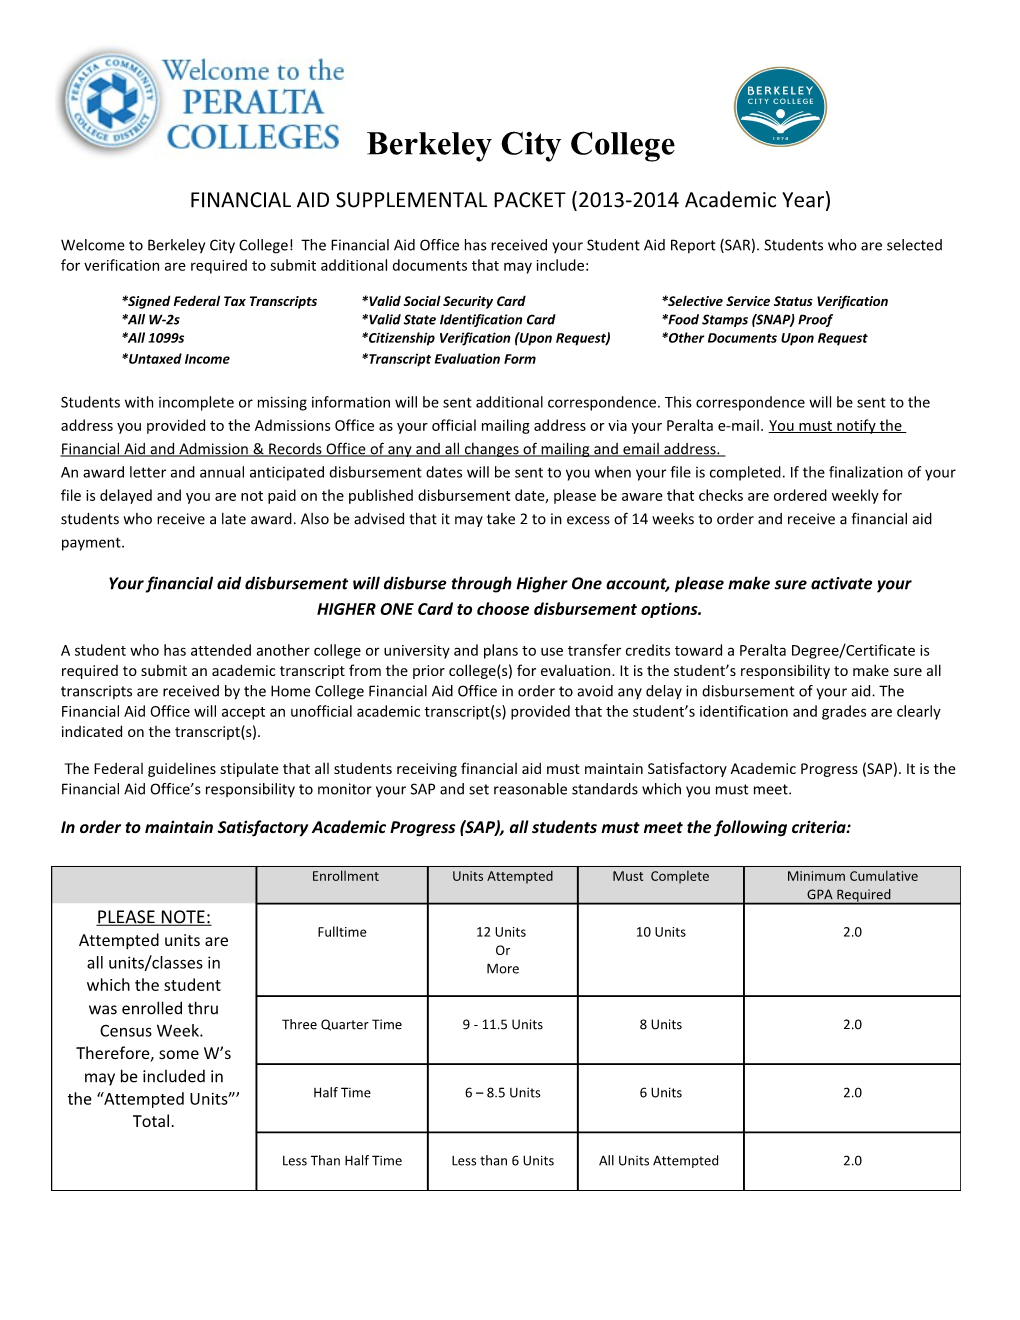 FINANCIAL AID SUPPLEMENTAL PACKET(2013-2014 Academic Year)